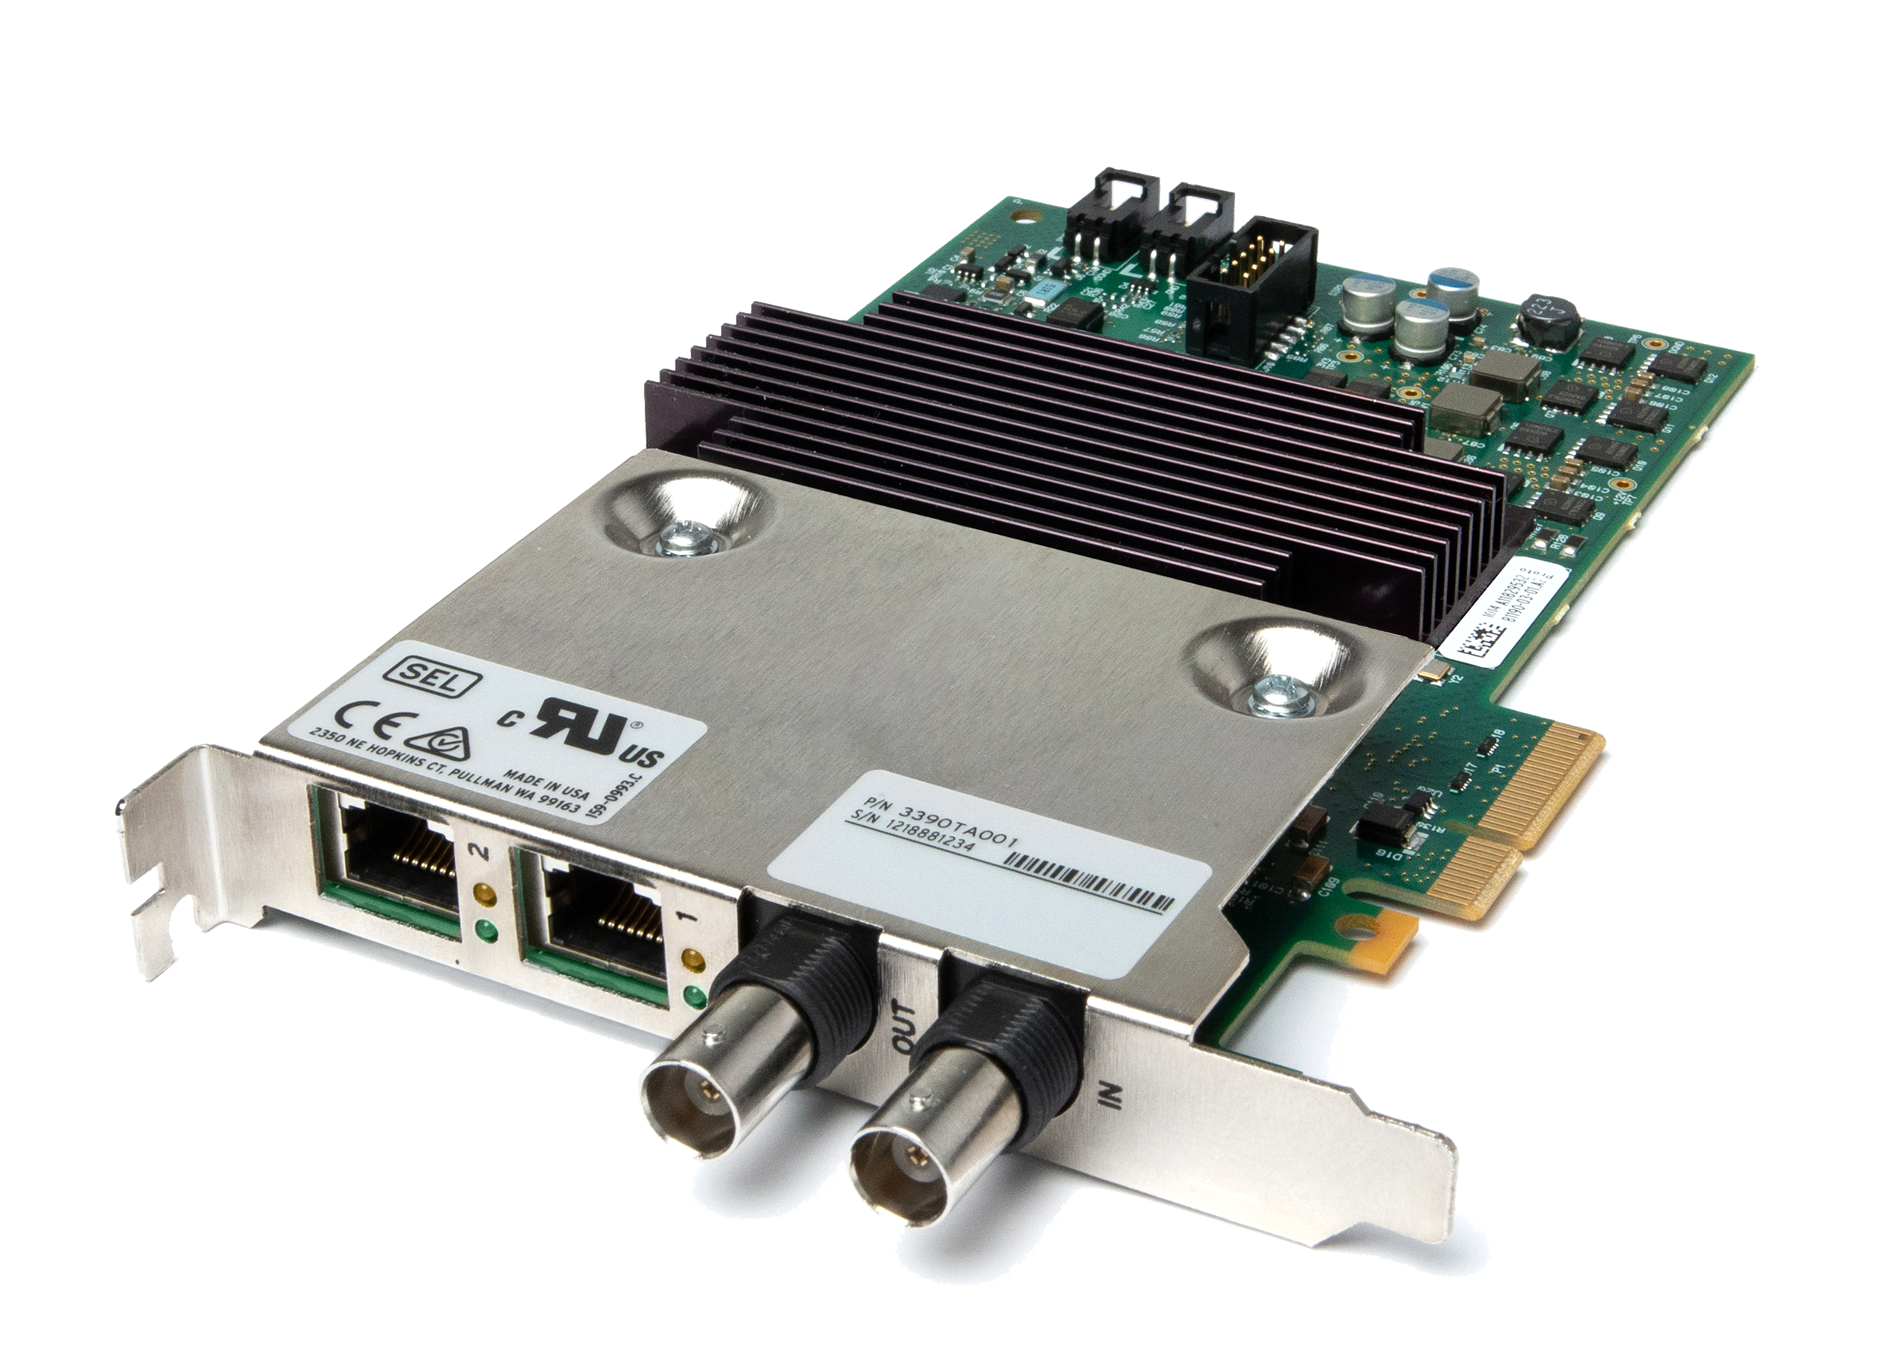 New SEL-3390T Time and Ethernet Adapter Card for SEL automation controllers